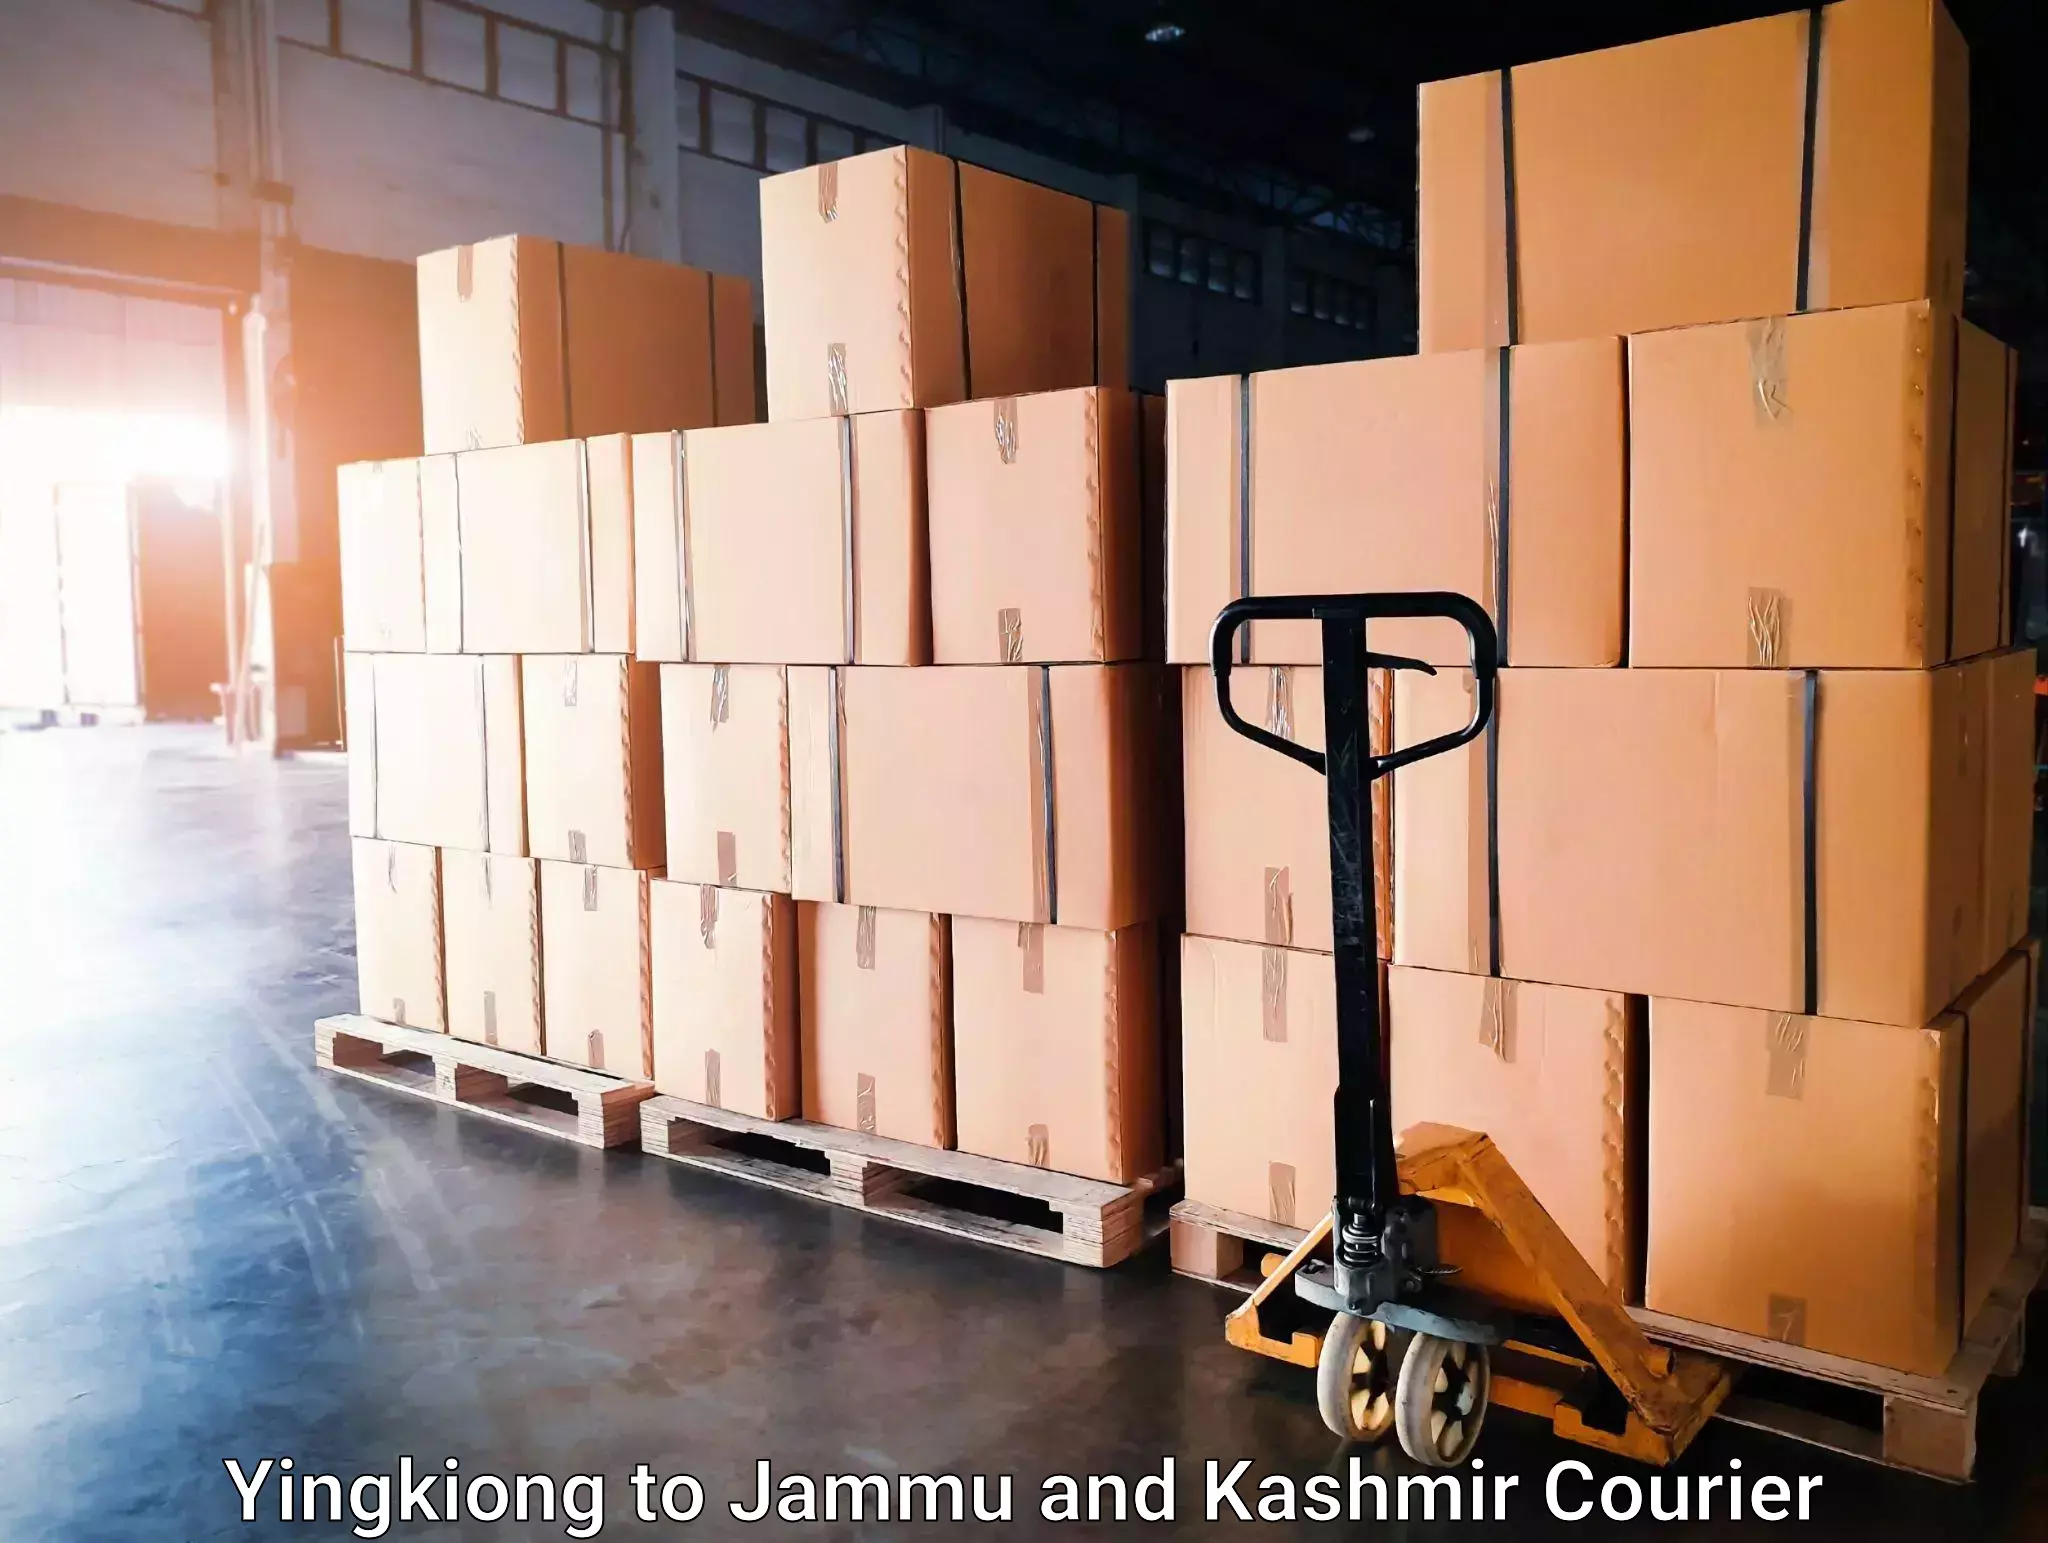 Courier service comparison Yingkiong to Rajouri